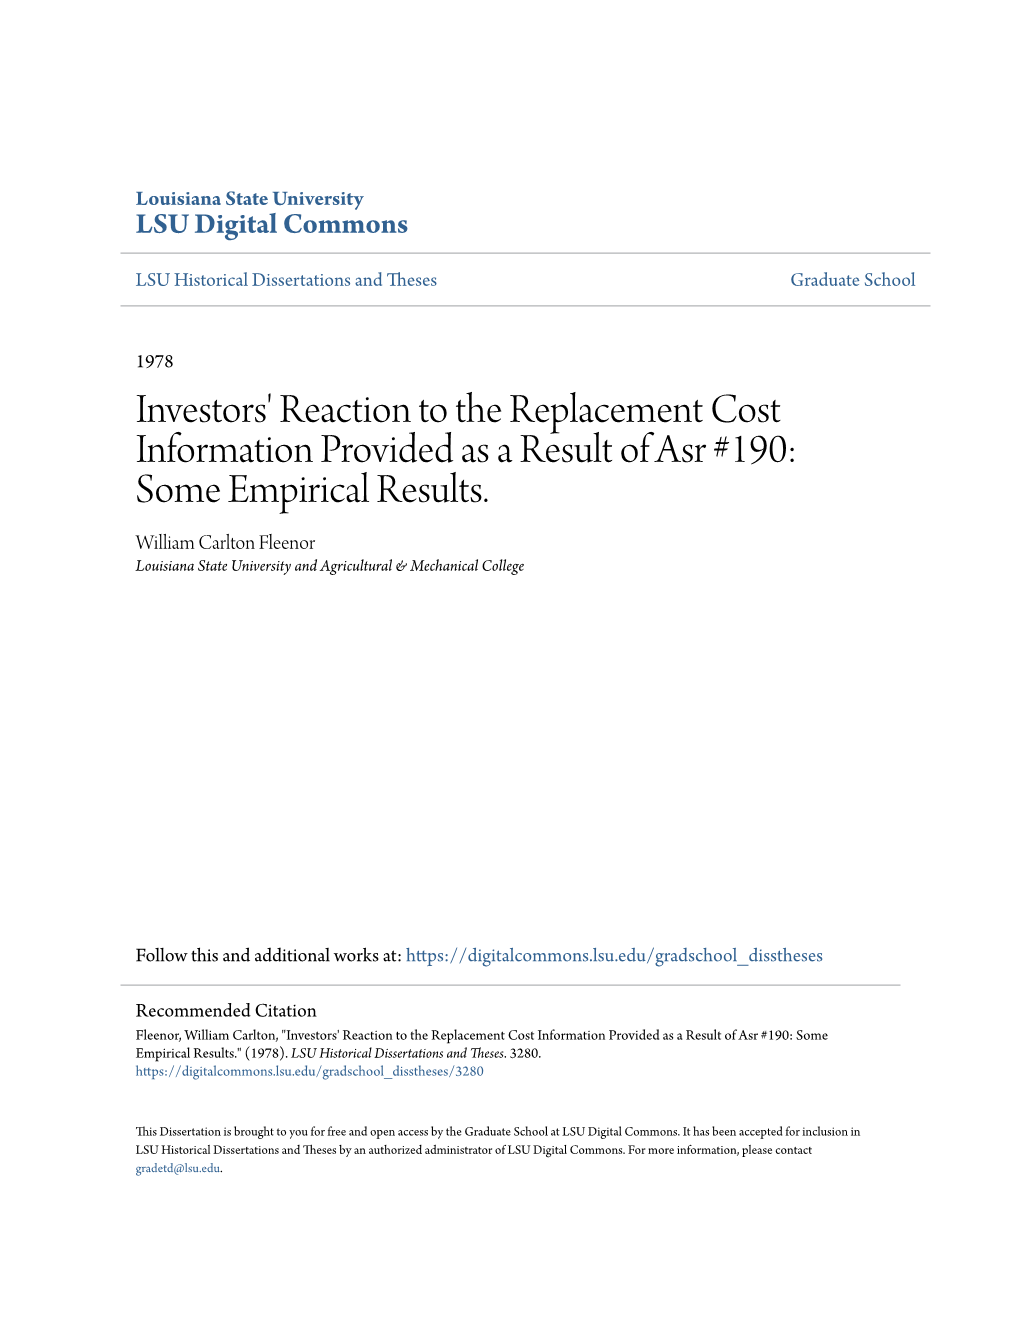 Investors' Reaction to the Replacement Cost Information Provided As a Result of Asr #190: Some Empirical Results